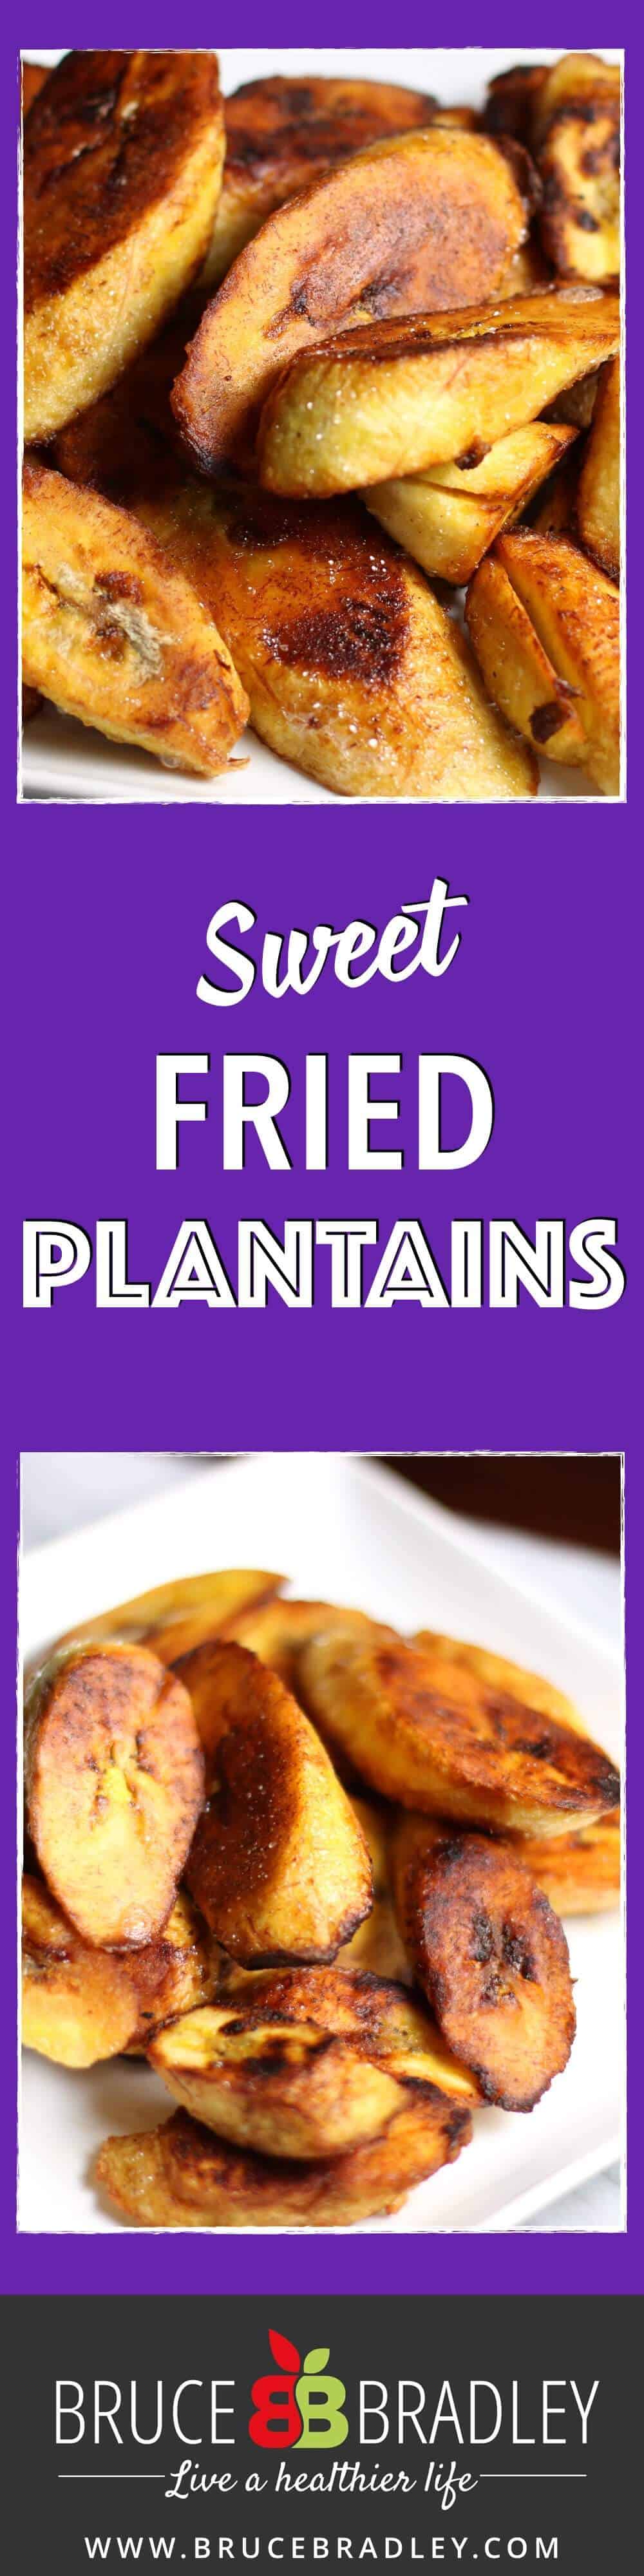 Fried Plantains Are A Delicious Side Dish That Are Easy To Make And Add A Distinct, Tropical Feel To Your Favorite Meals.